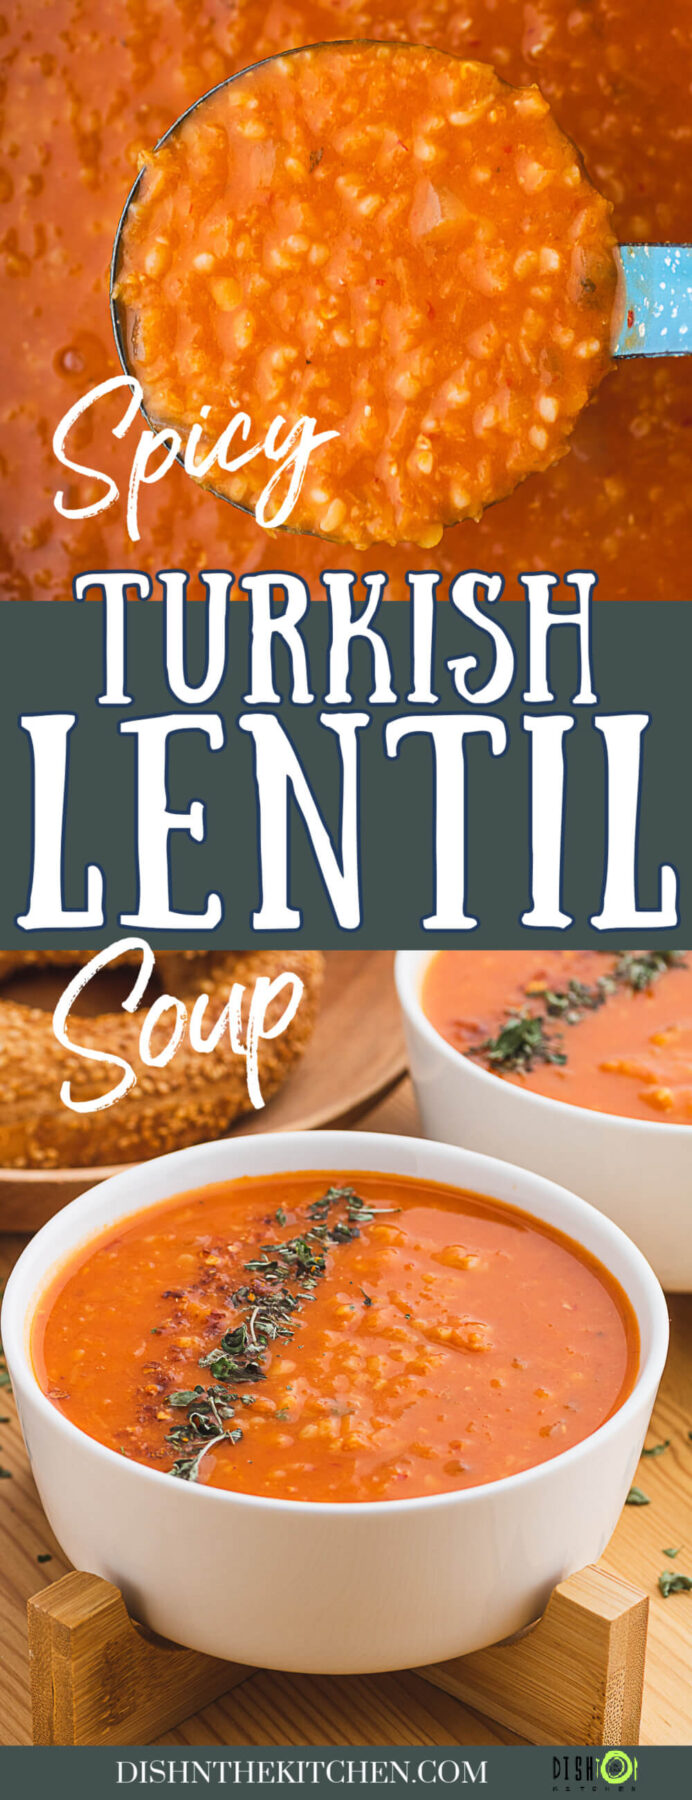 Pinterest image featuring a fiery red Turkish Lentil Soup in a blue ladle and white bowl garnished with mint leaves and red pepper flakes.